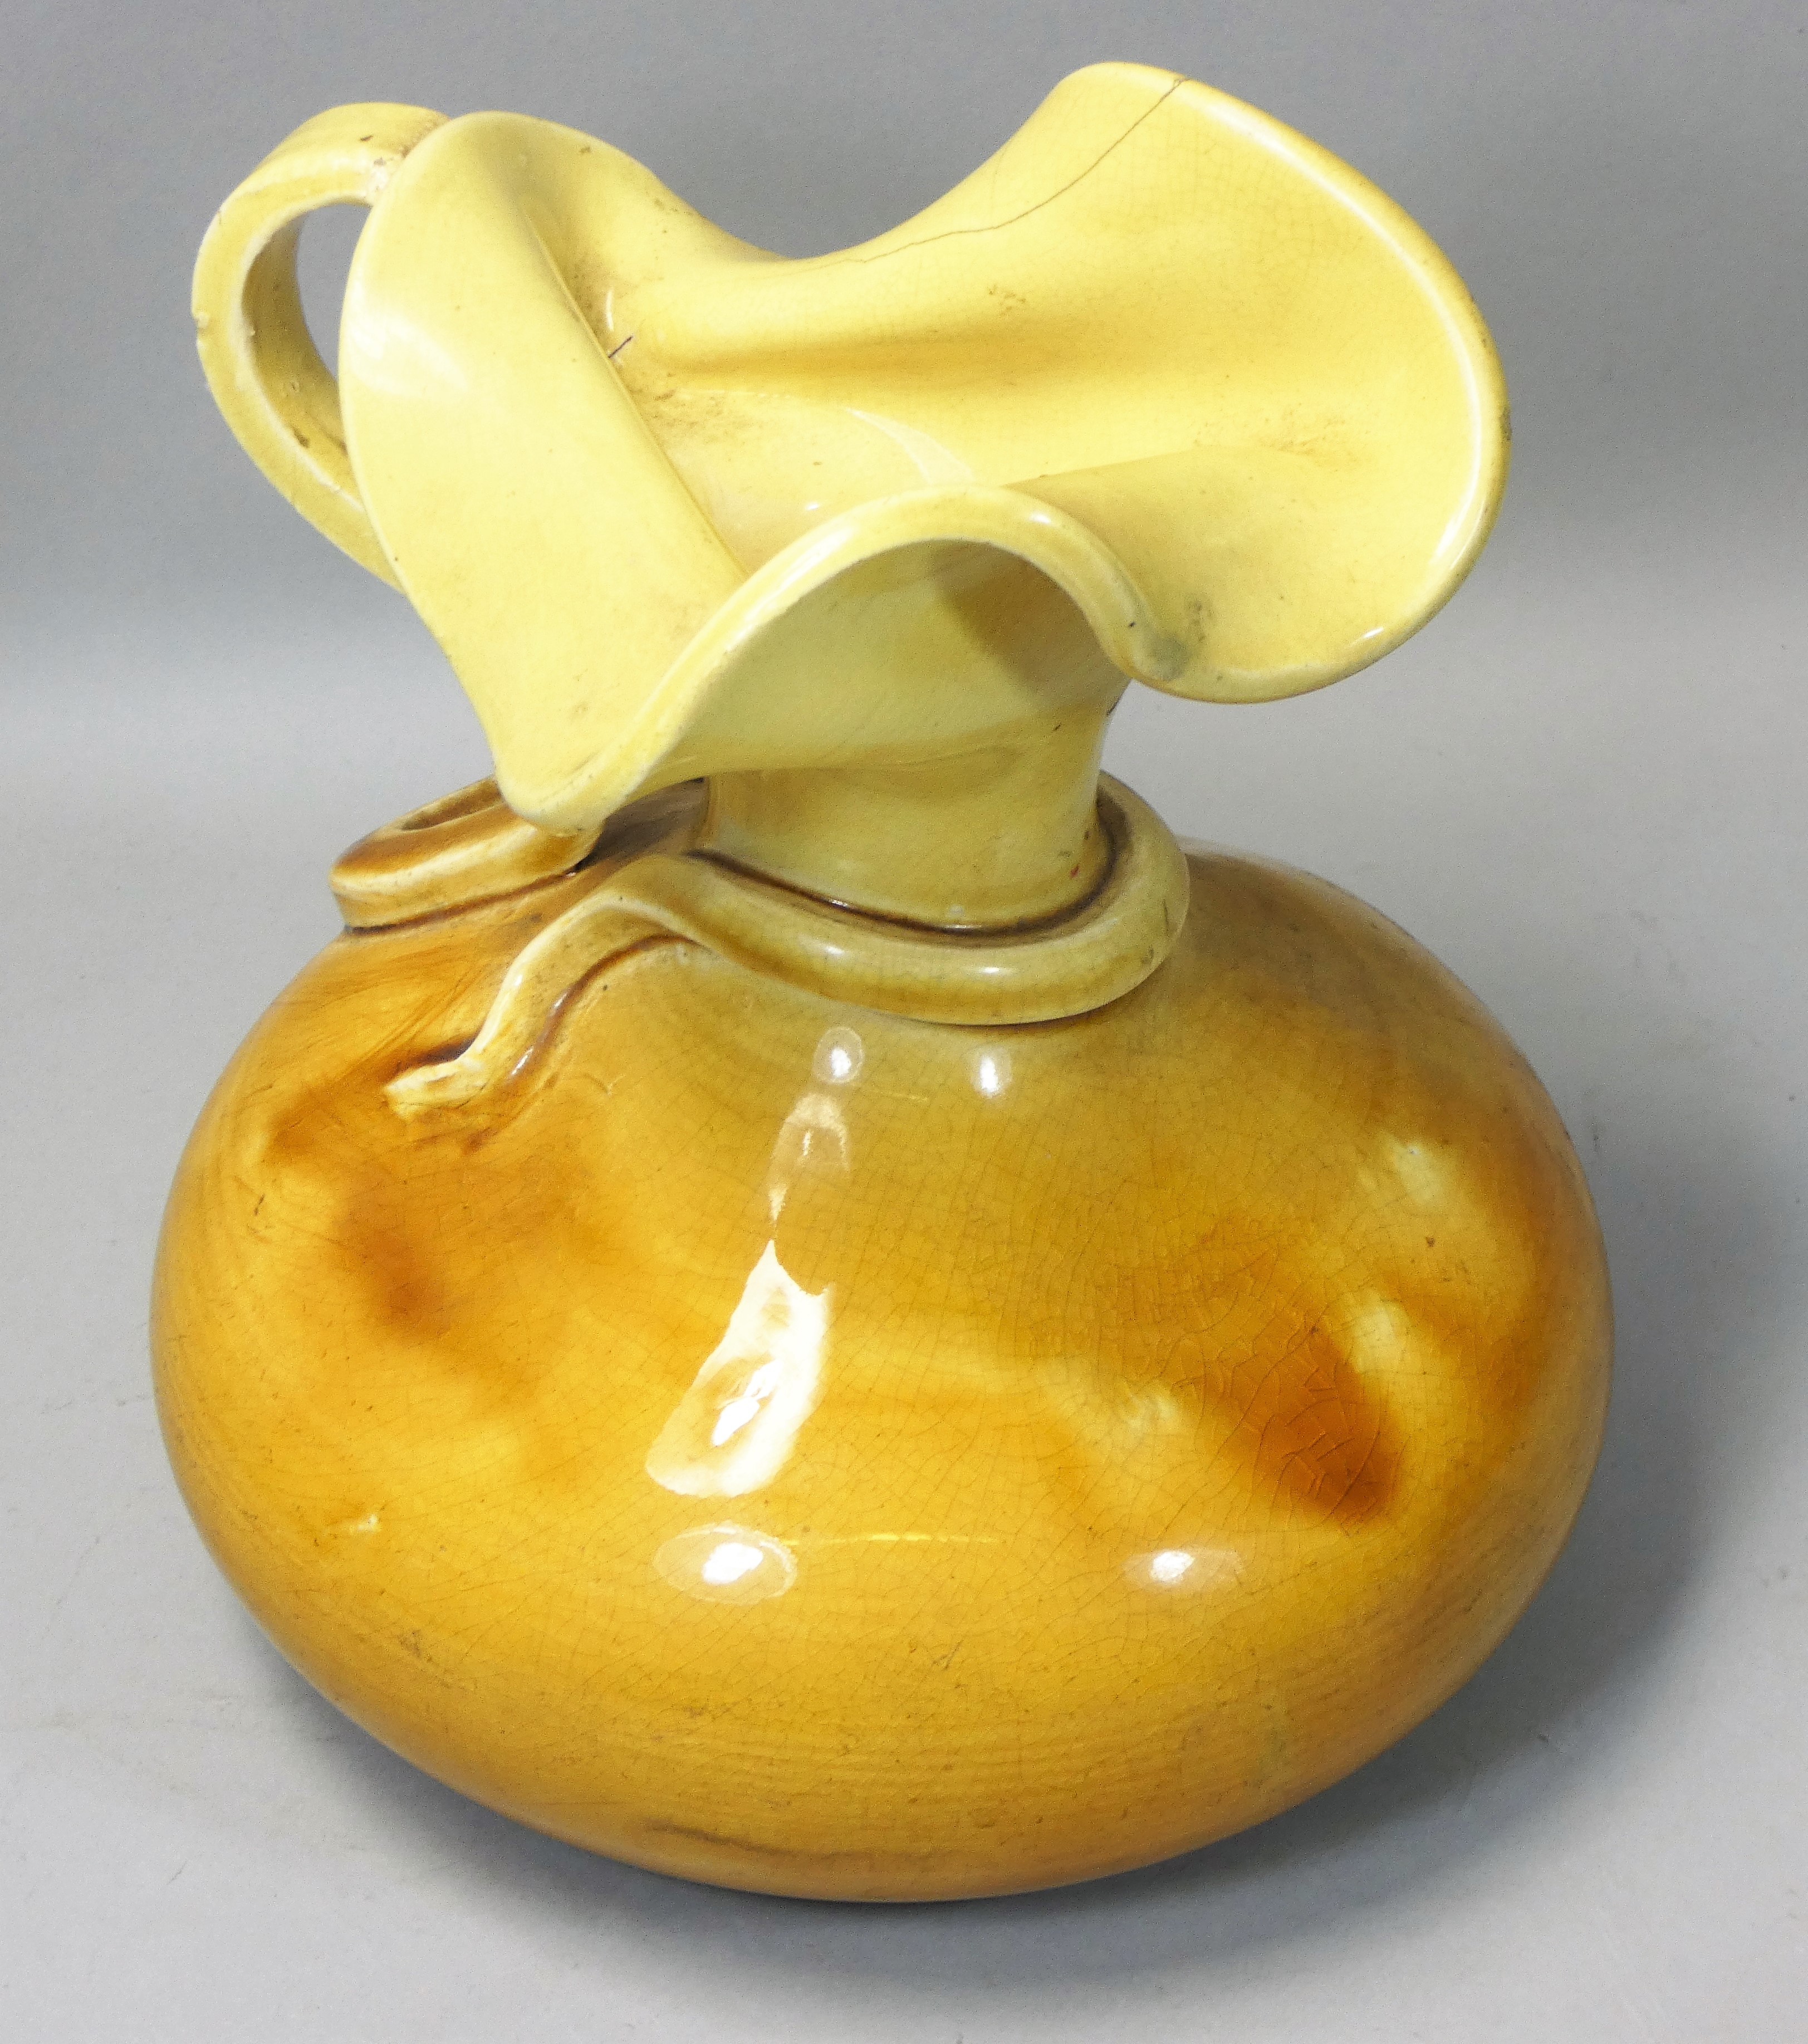 J R Mally, an 'Old London Ware' studio art pottery distorted yellow squat vase, in the form of a jug